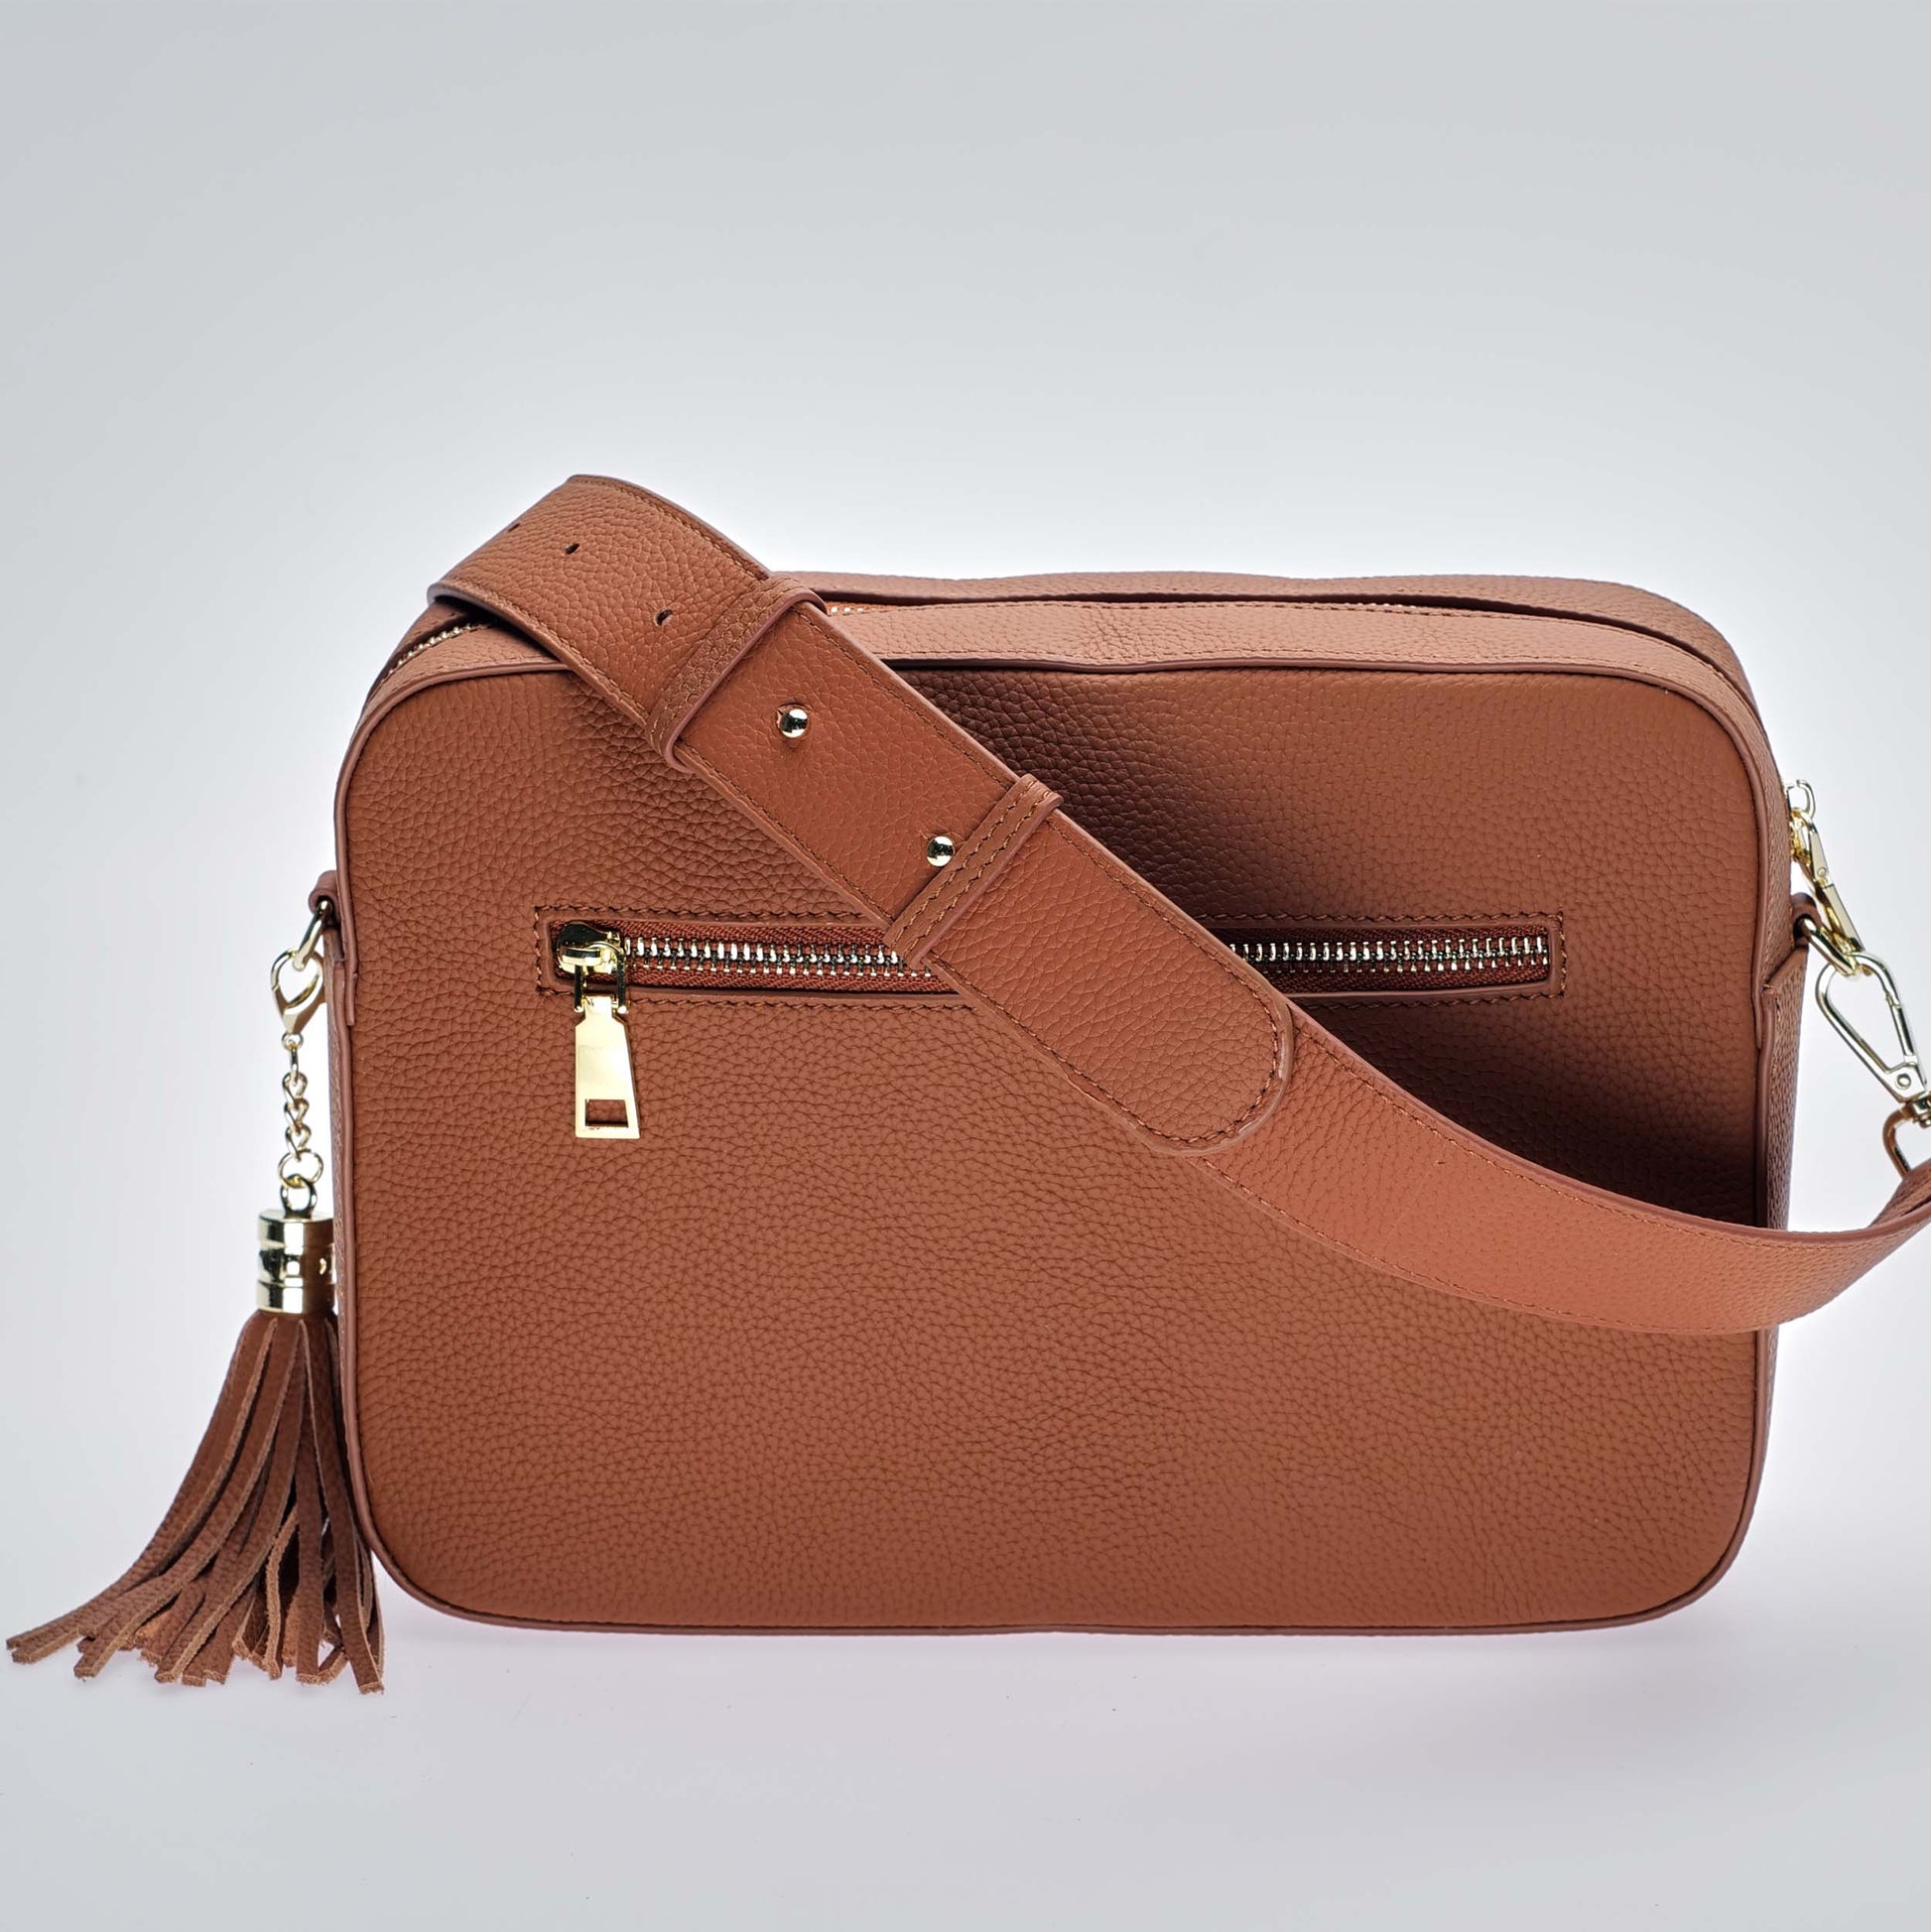 The Stratford XL Leather Crossbody Bag by Swoon London